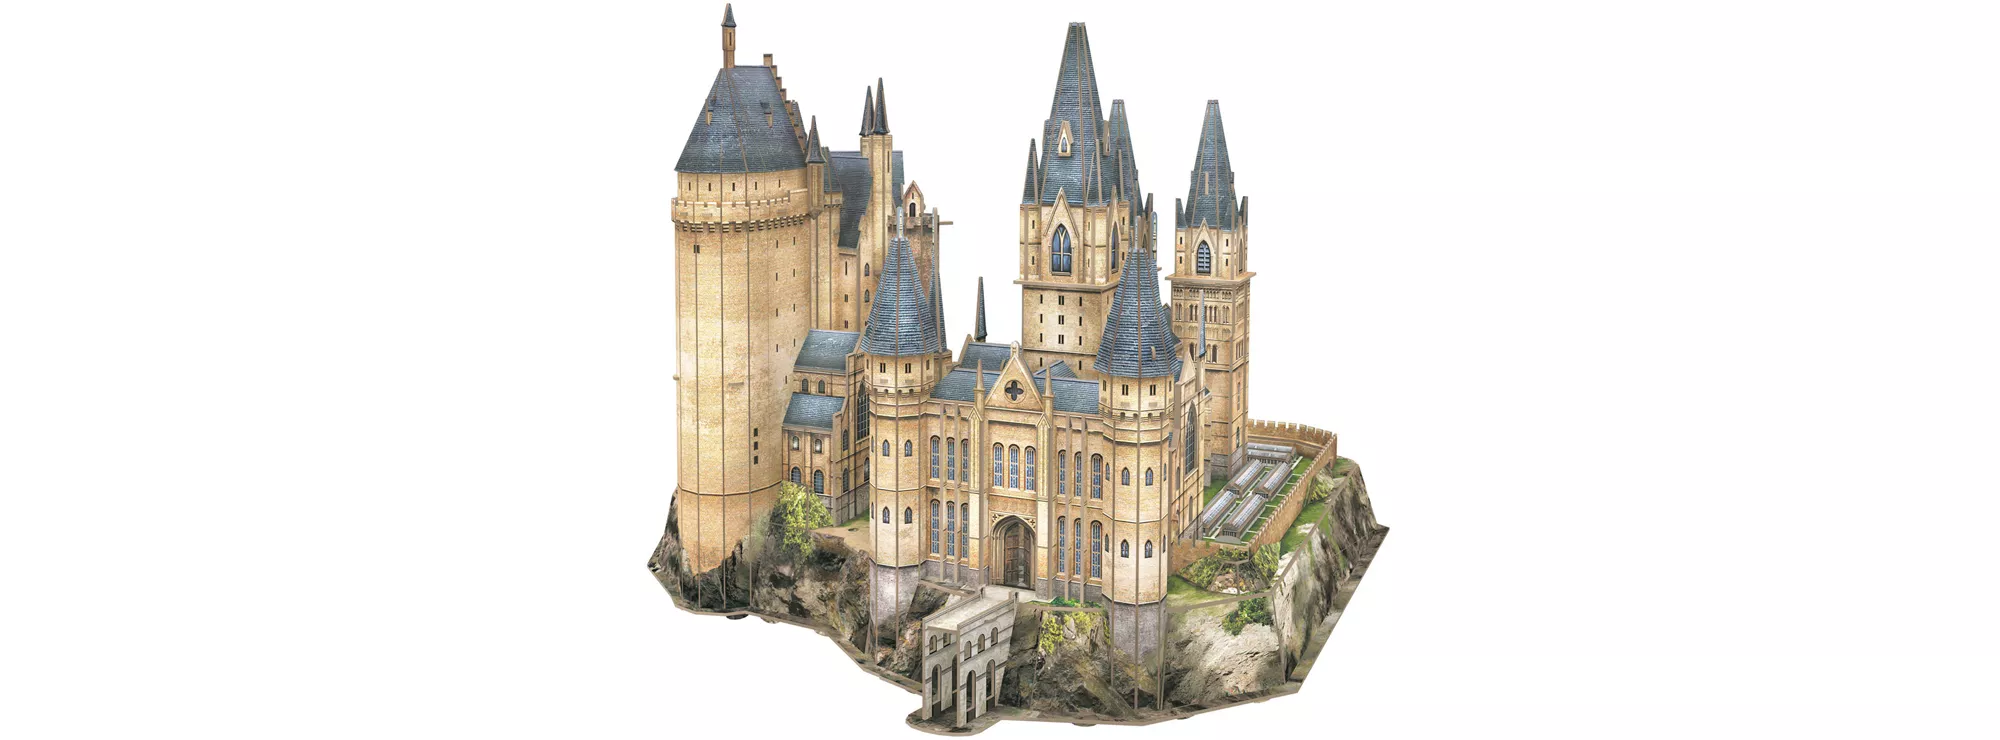 Revell 00301 3D Puzzle Harry Harry Potter Hogwarts Astronomy Tower